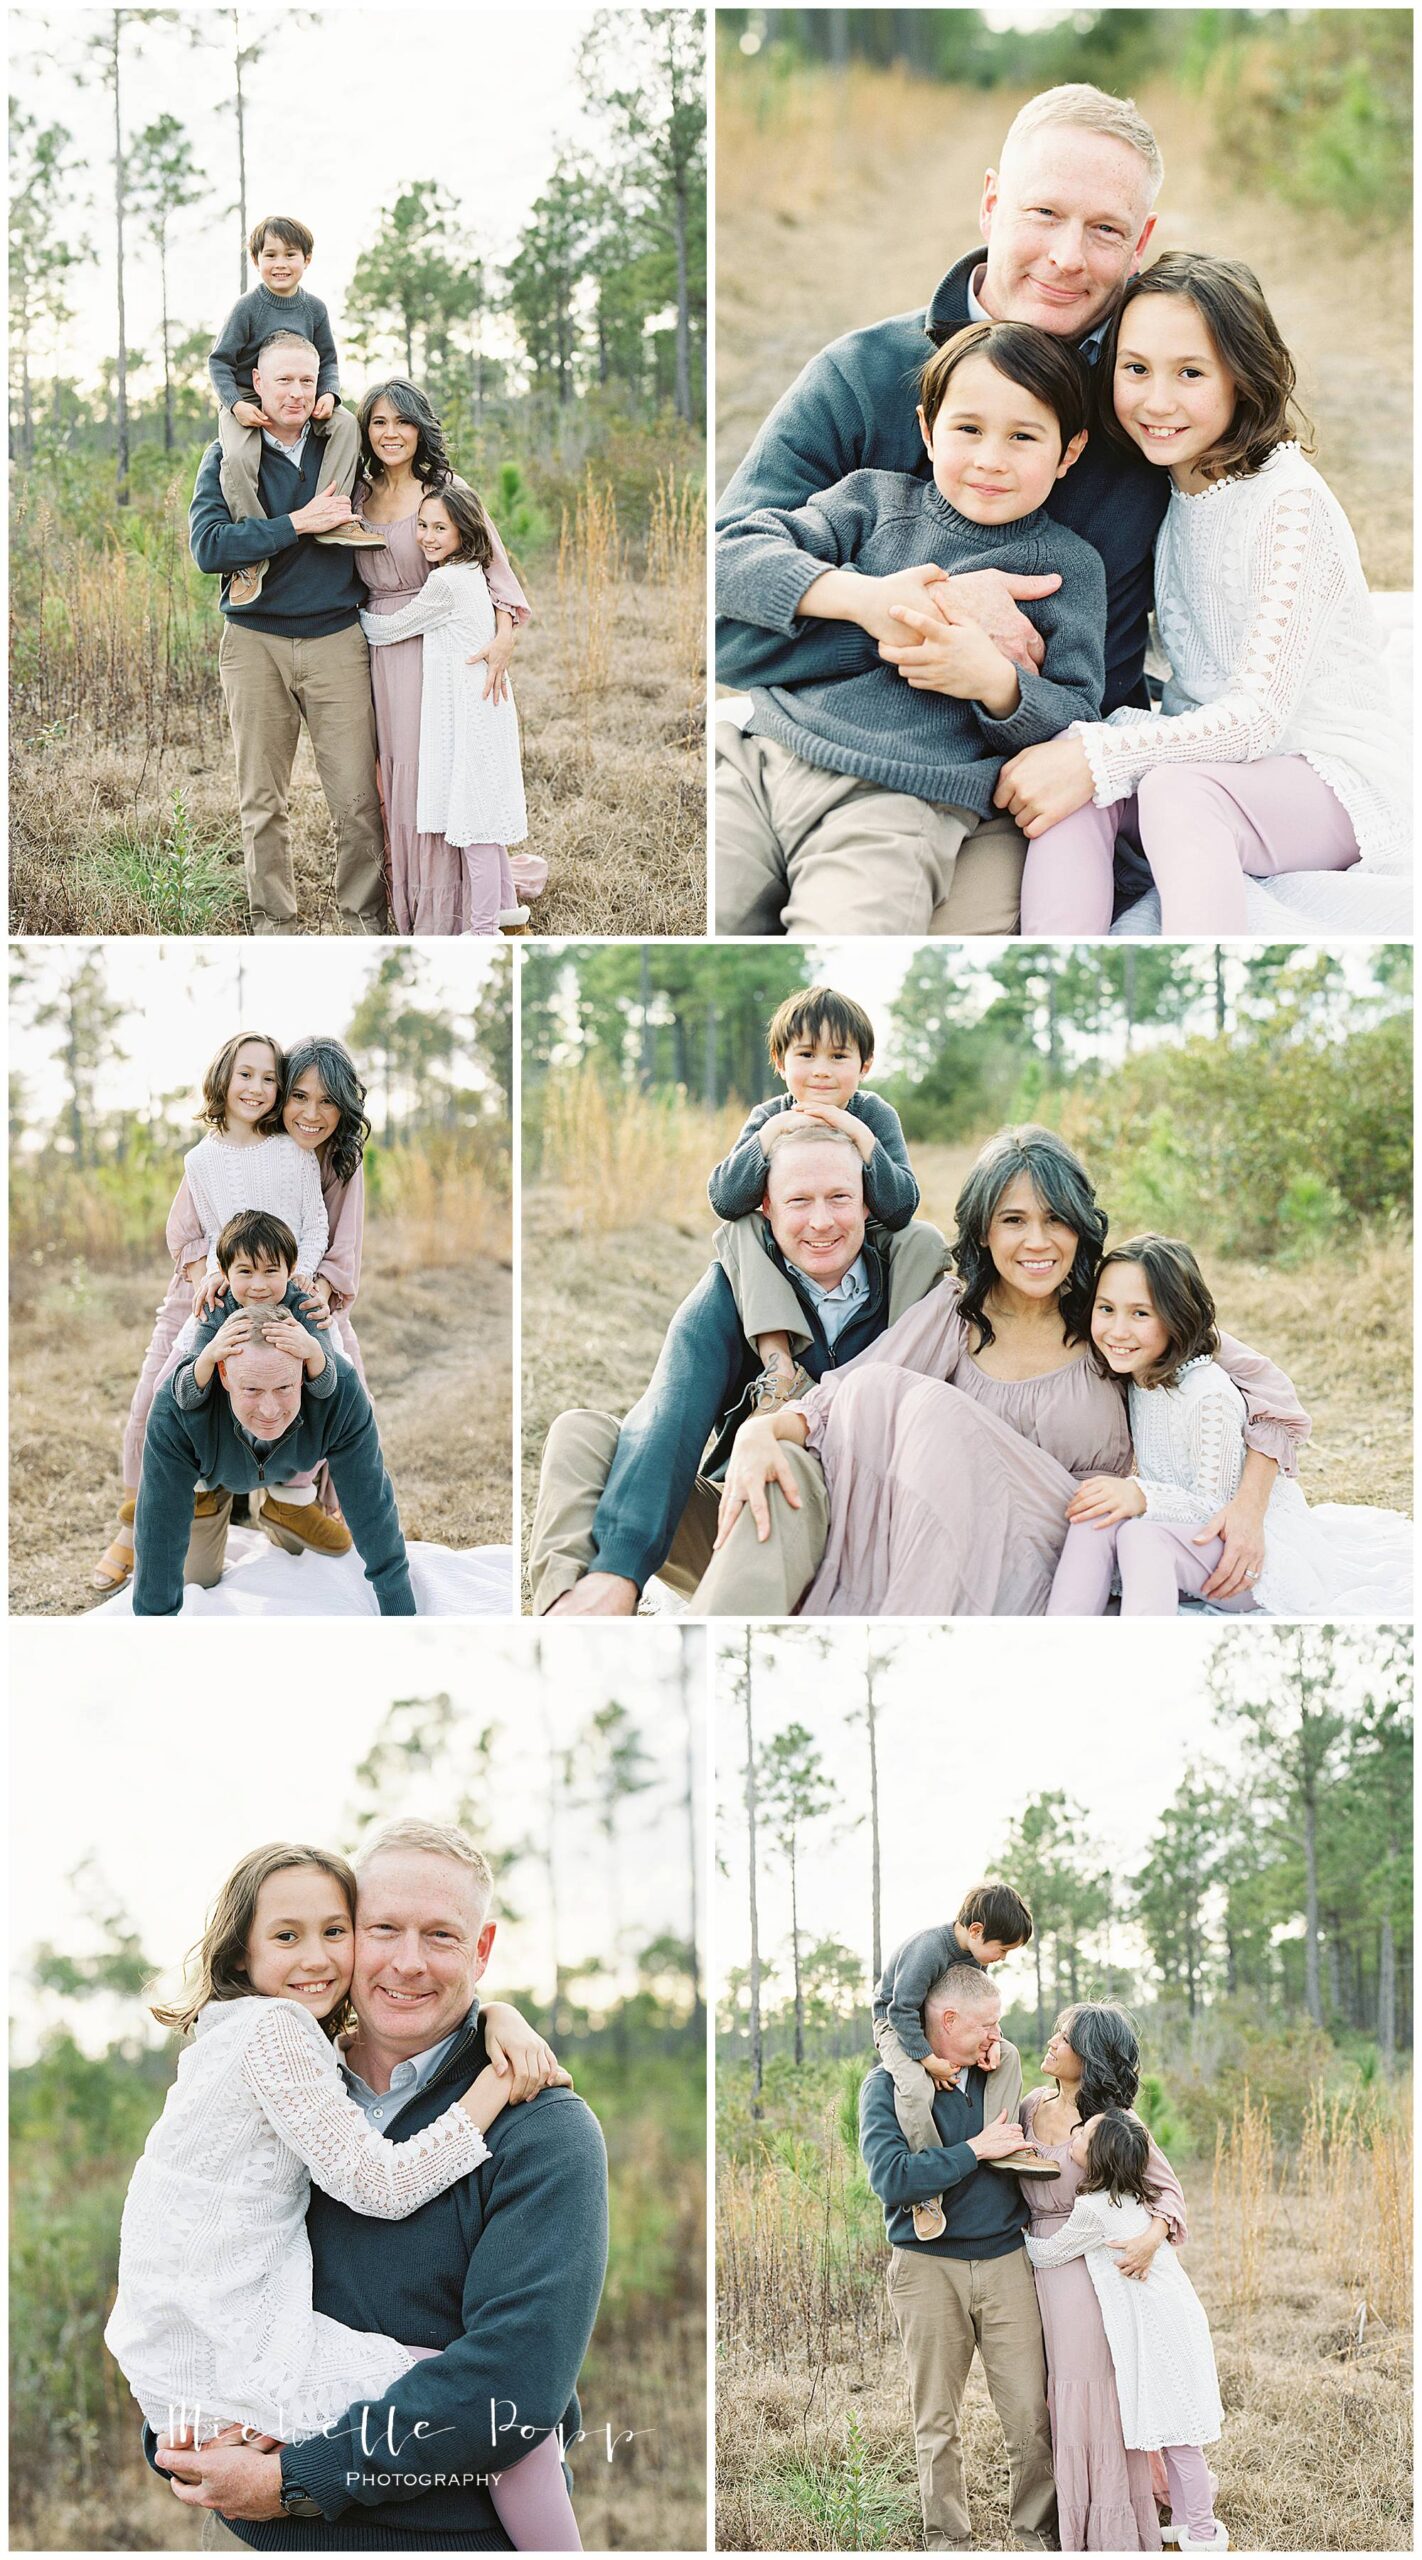 Fall family portraits in nature